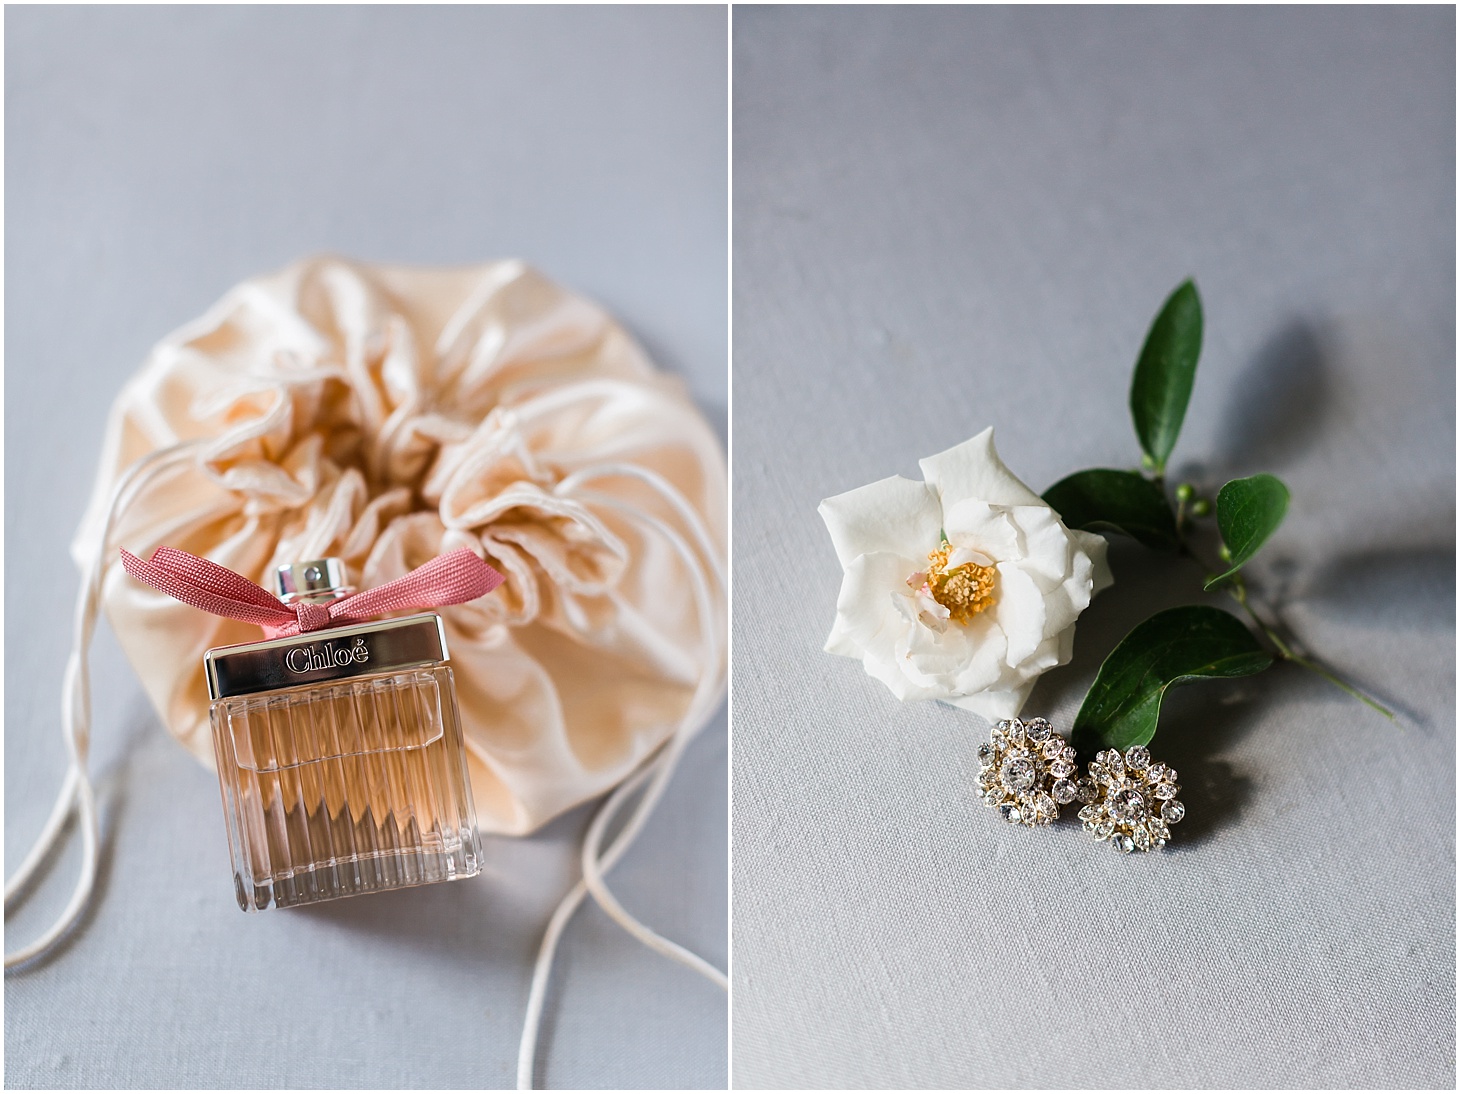 Chloe Perfume and Flower Stud Wedding Earrings, Champagne-toned Multicultural Wedding the Hay-Adams Hotel, Ceremony at National City Christian Church, Sarah Bradshaw Photography, DC Wedding Photographer